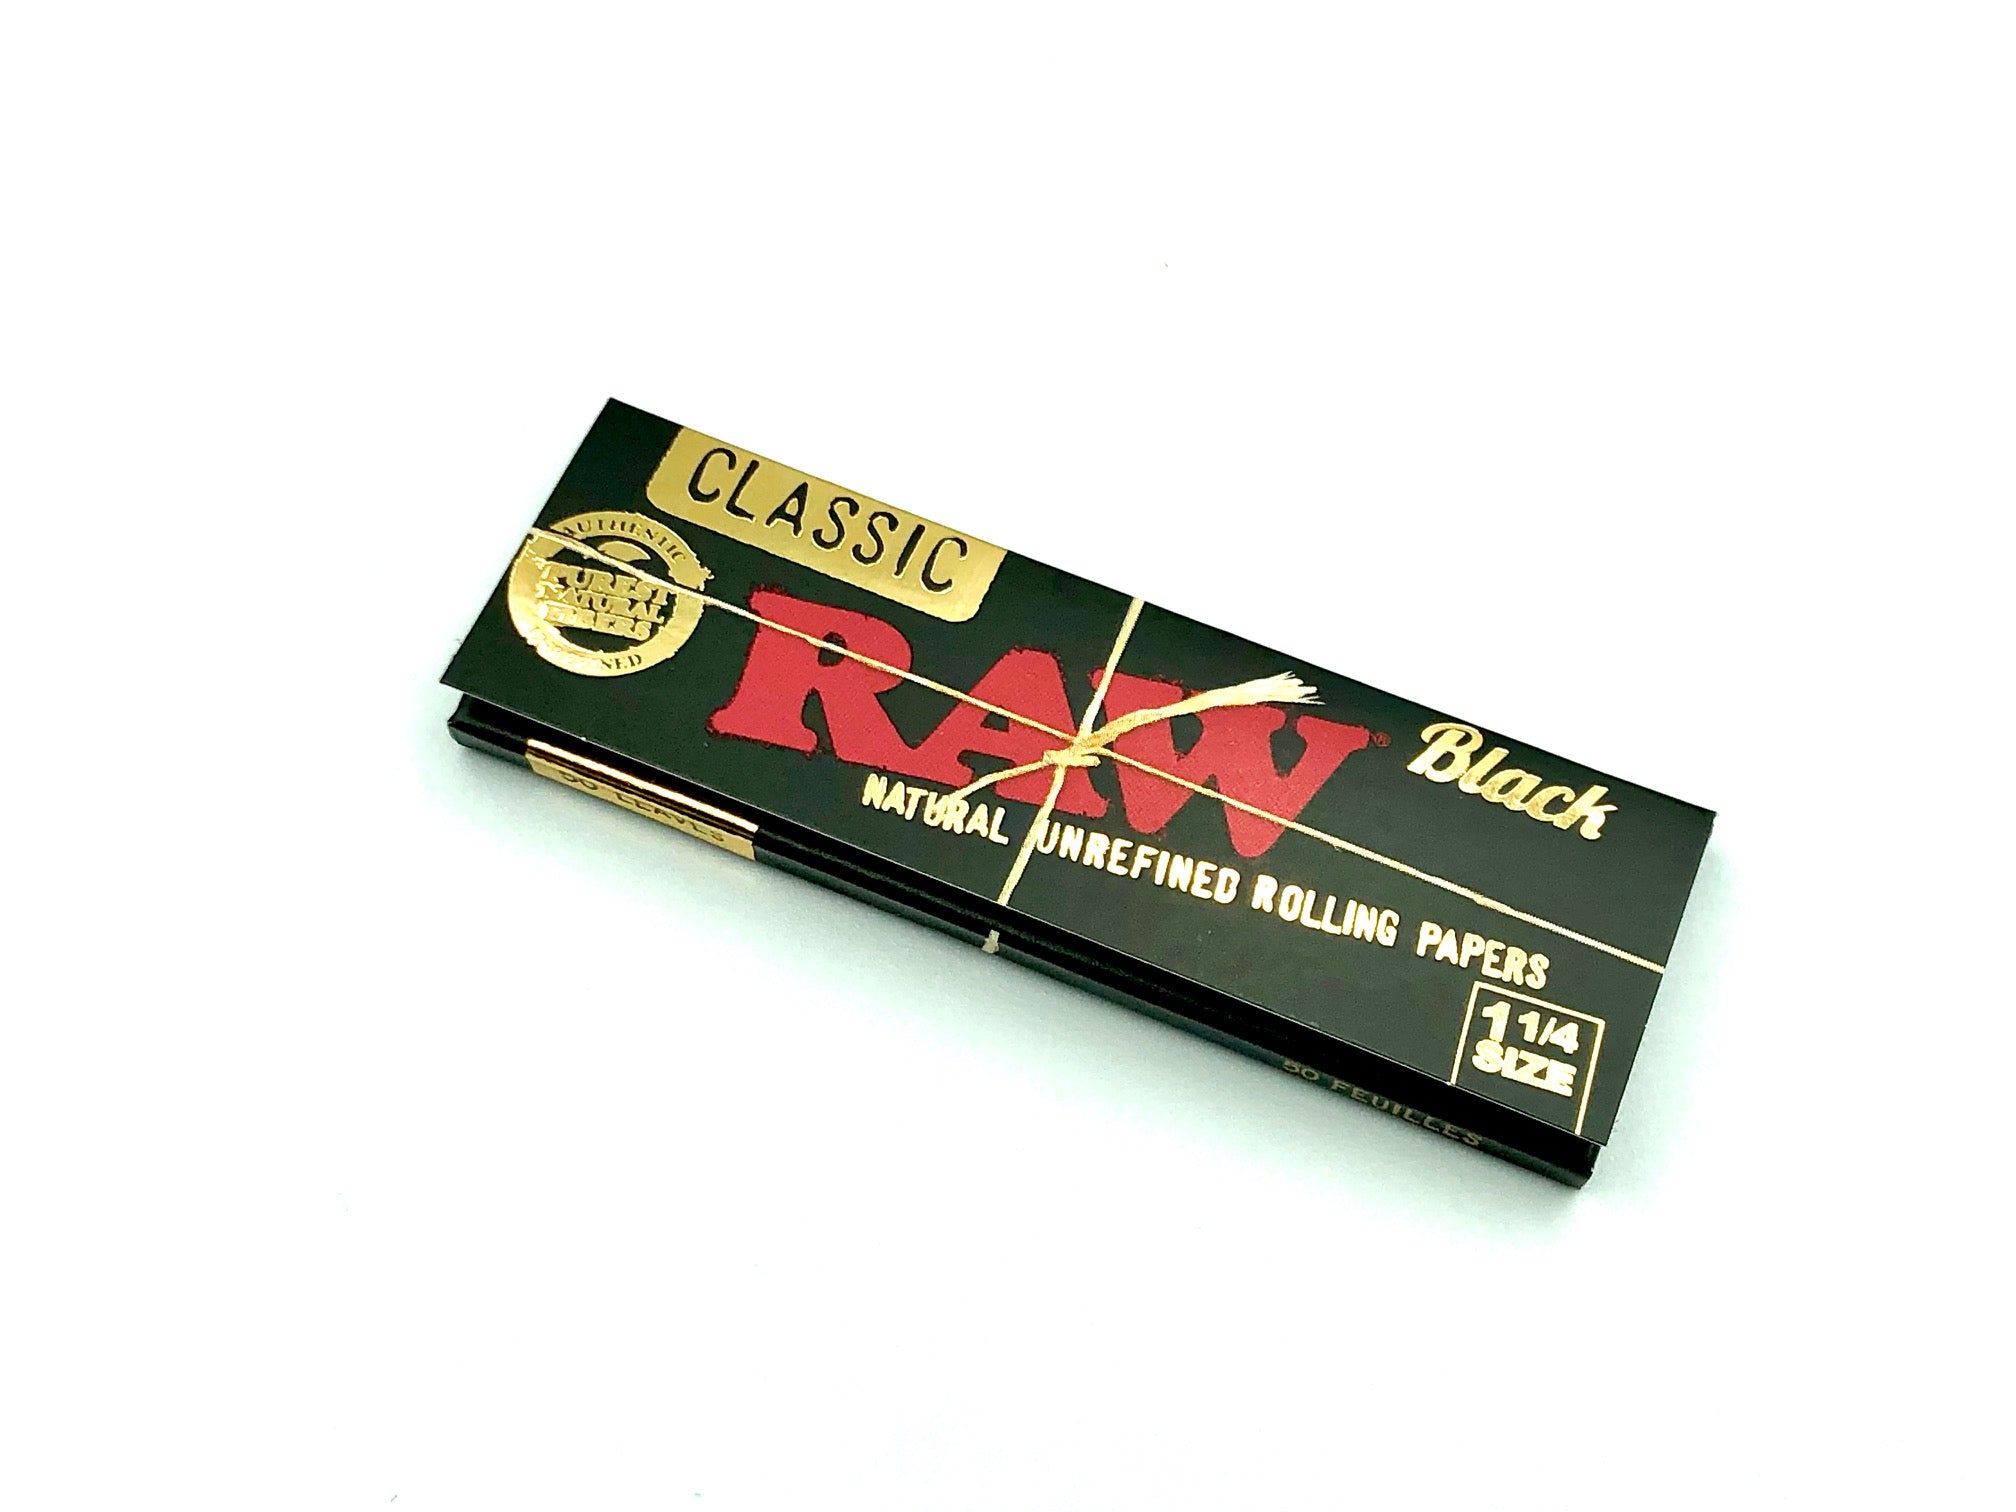 RAW Papers short 1 /1/4